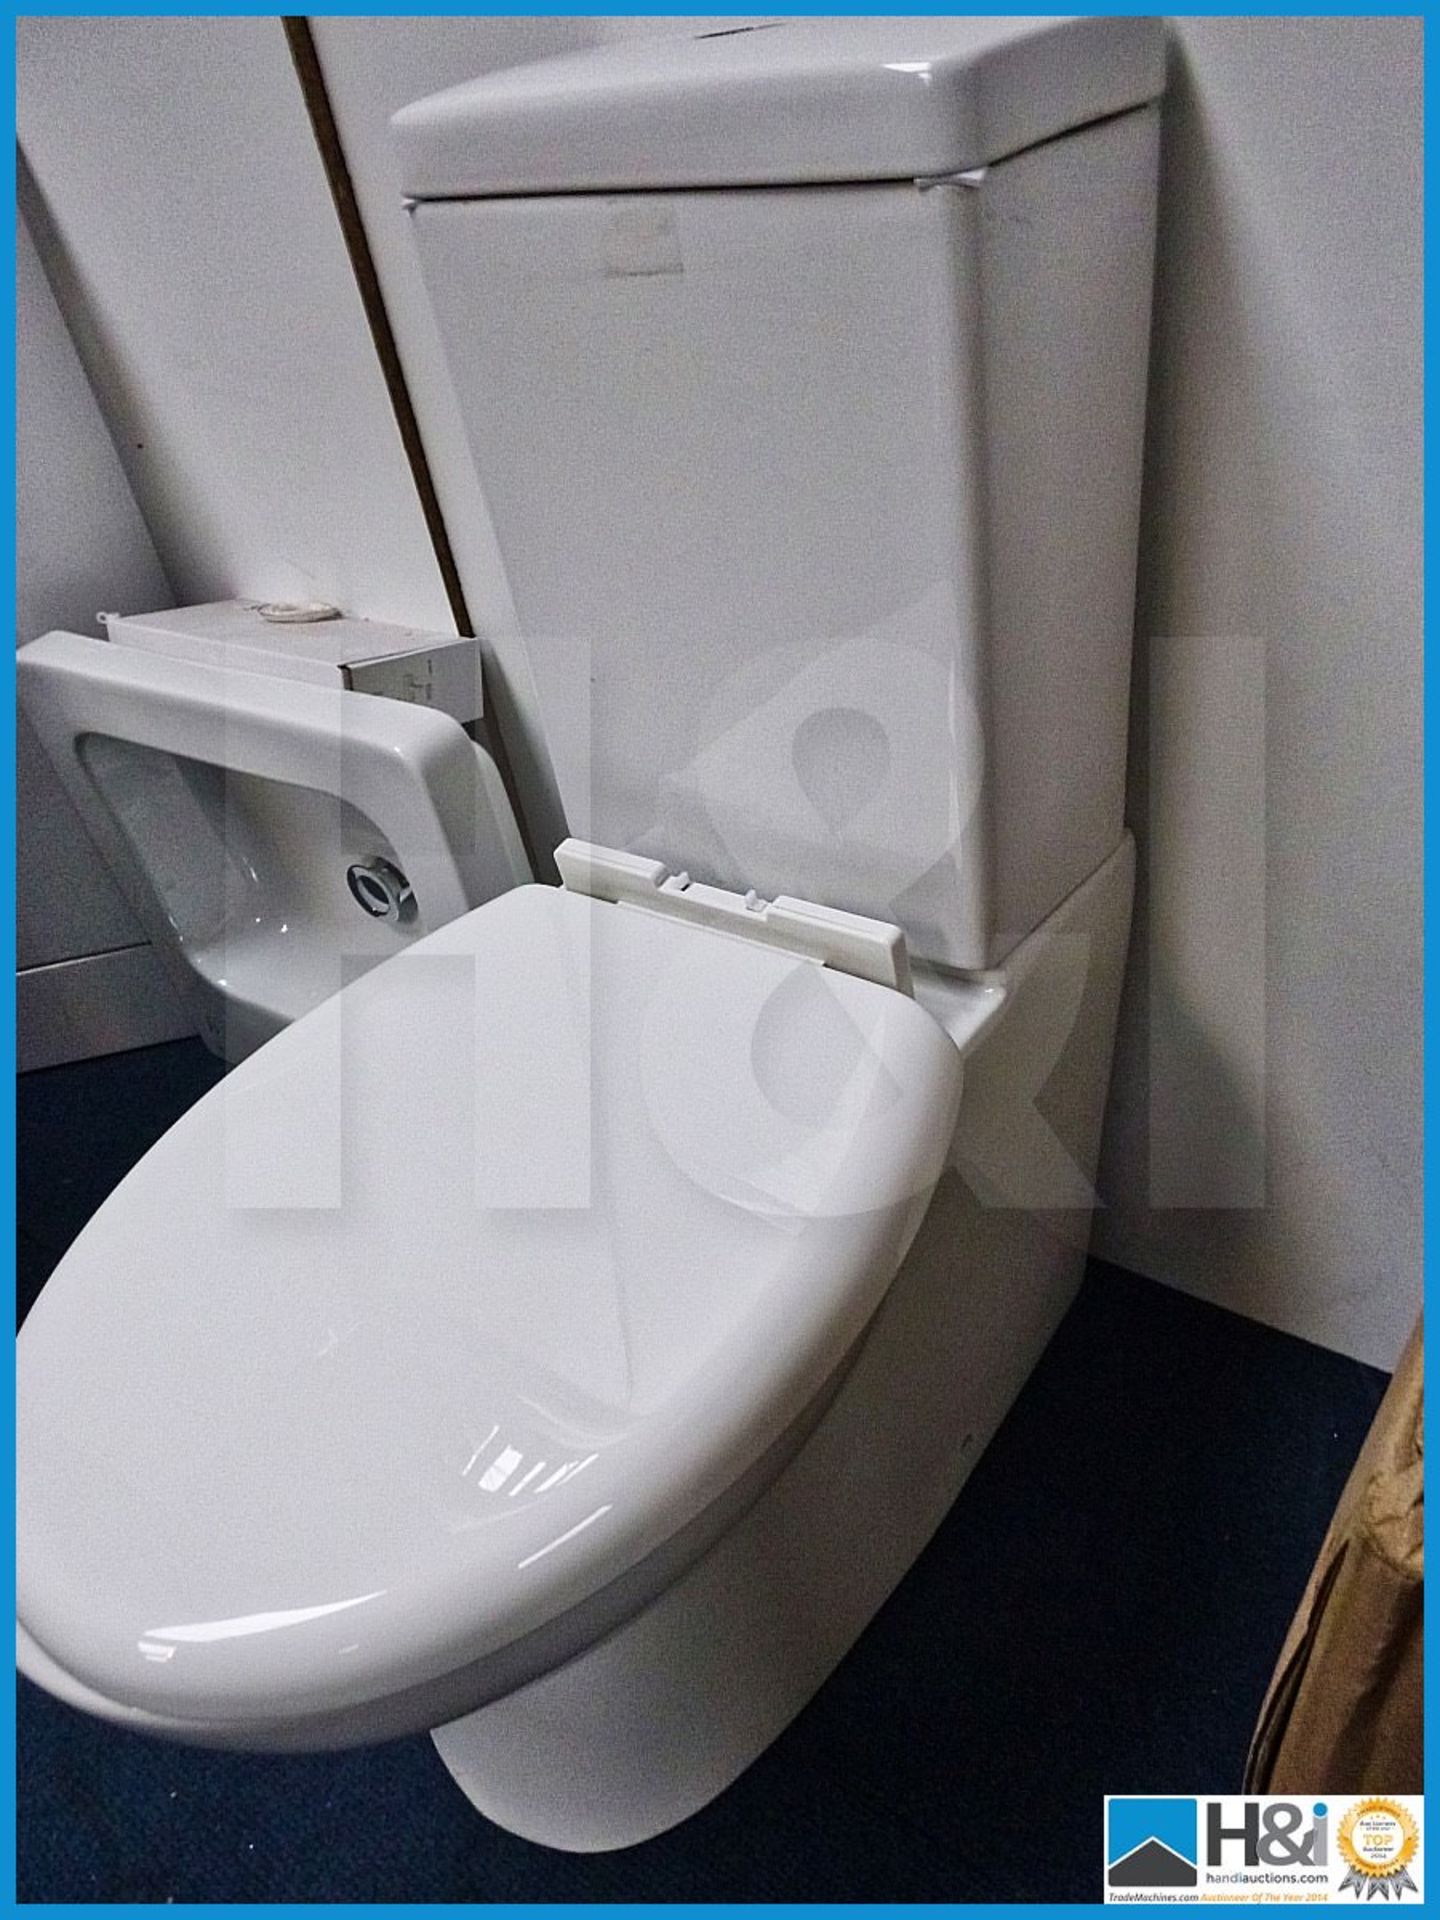 Designer full fascia close couple WC complete with detatchable soft close seat. JC-2026. RRP 599 GBP - Image 3 of 3